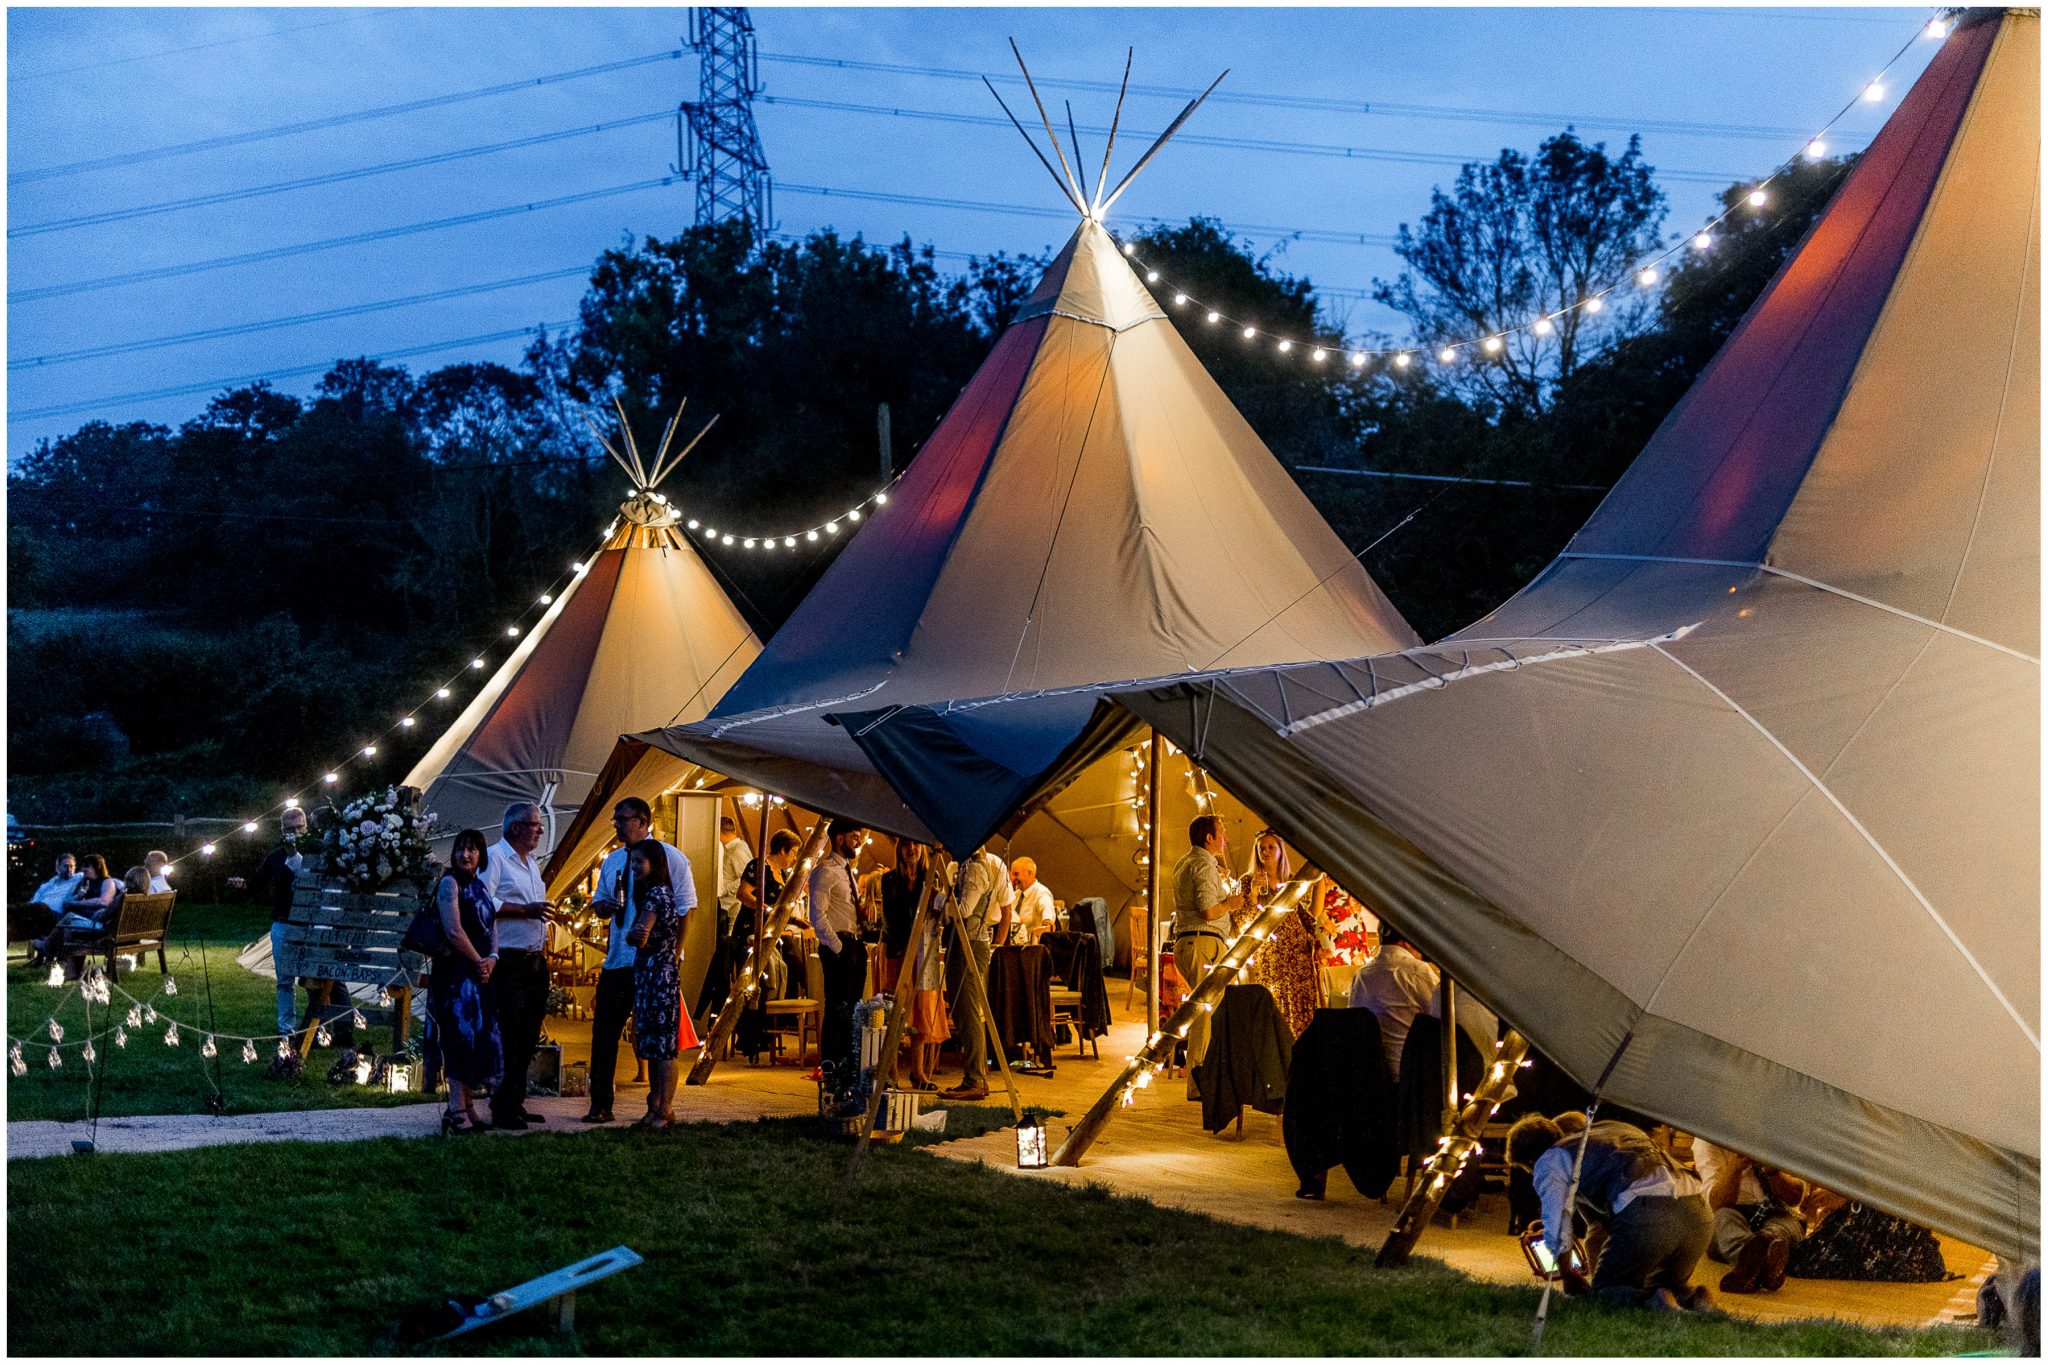 The tipi lit up and night for the evening party